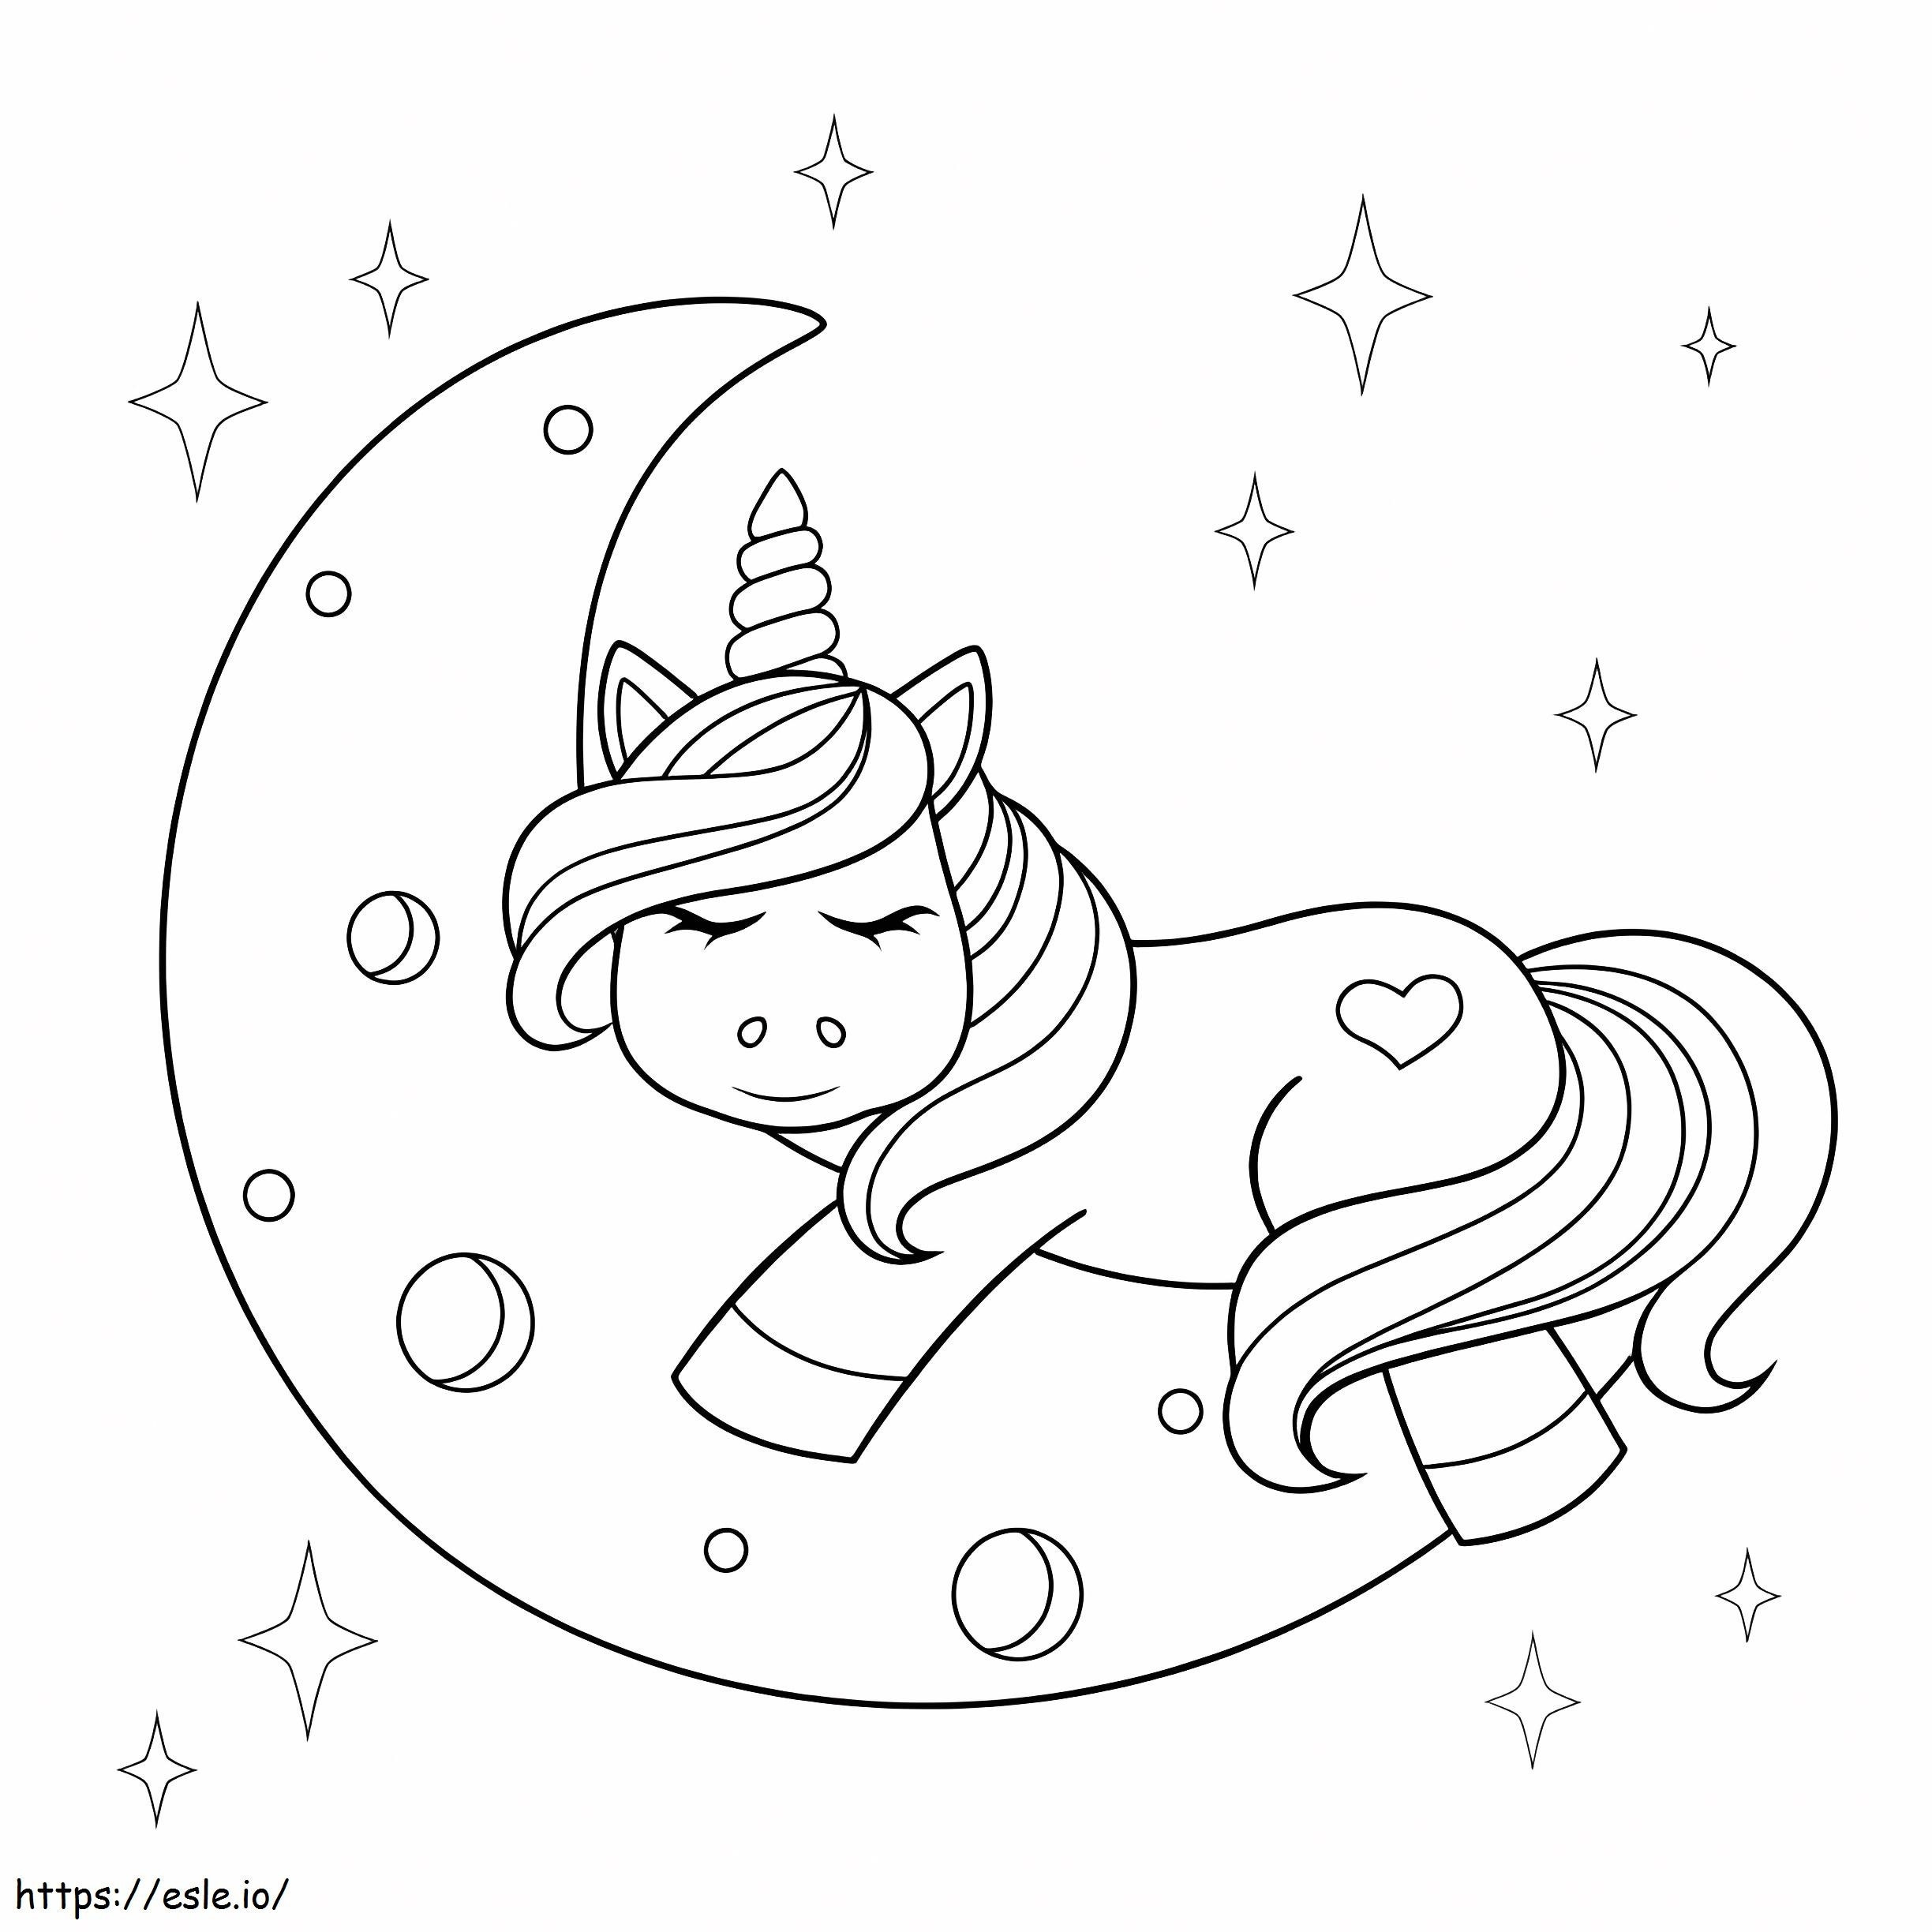 Unicorn Boy On The Moon coloring page